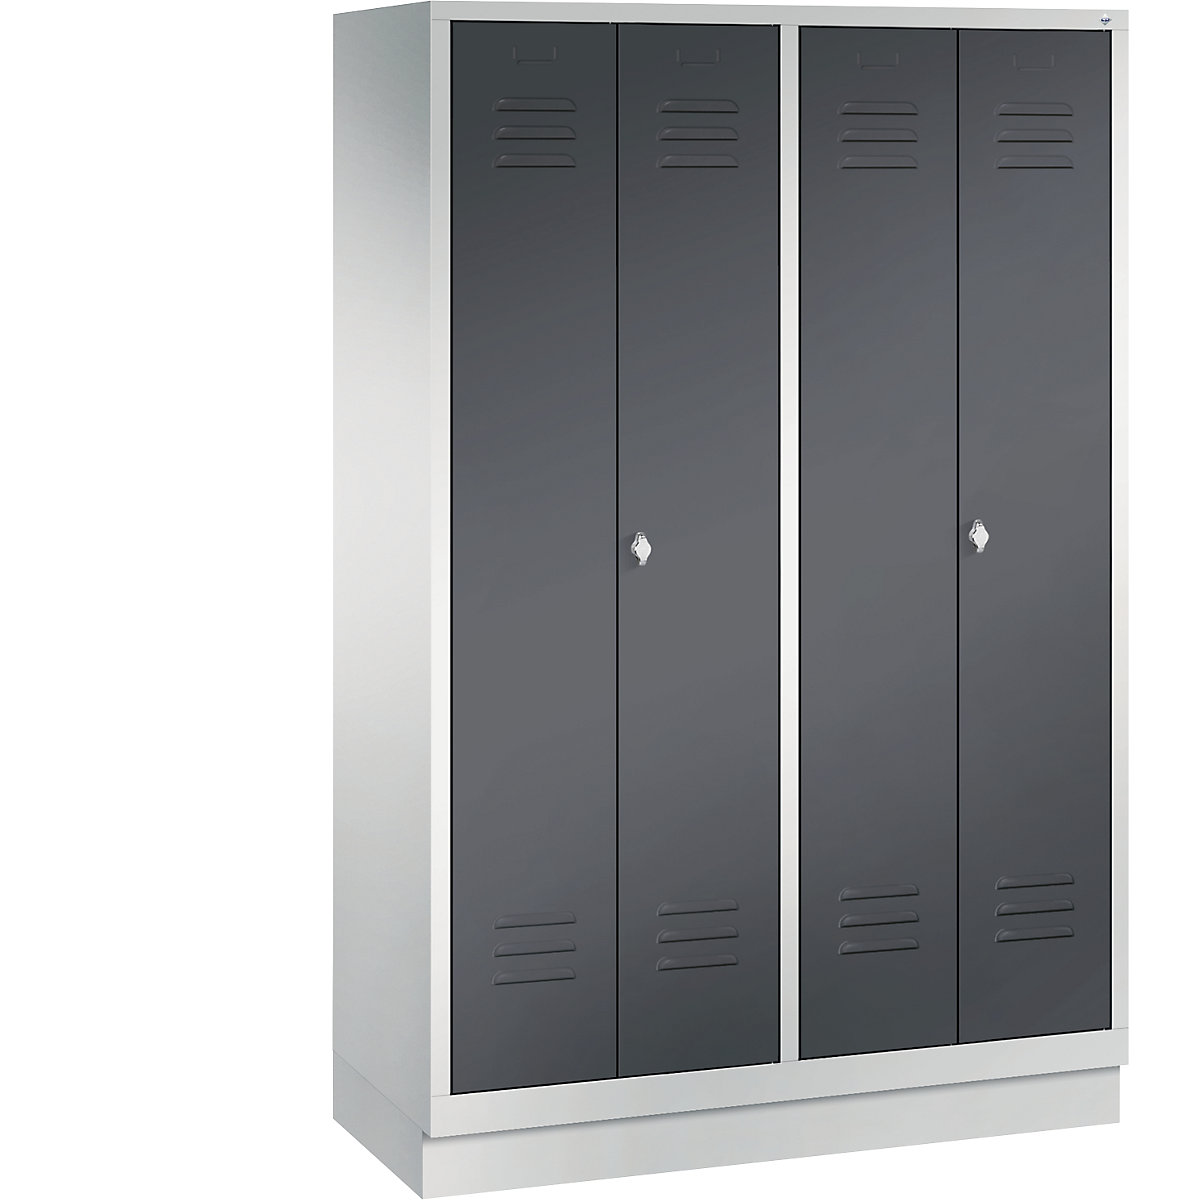 CLASSIC cloakroom locker with plinth, doors close in the middle – C+P, 4 compartments, compartment width 300 mm, light grey / black grey-10